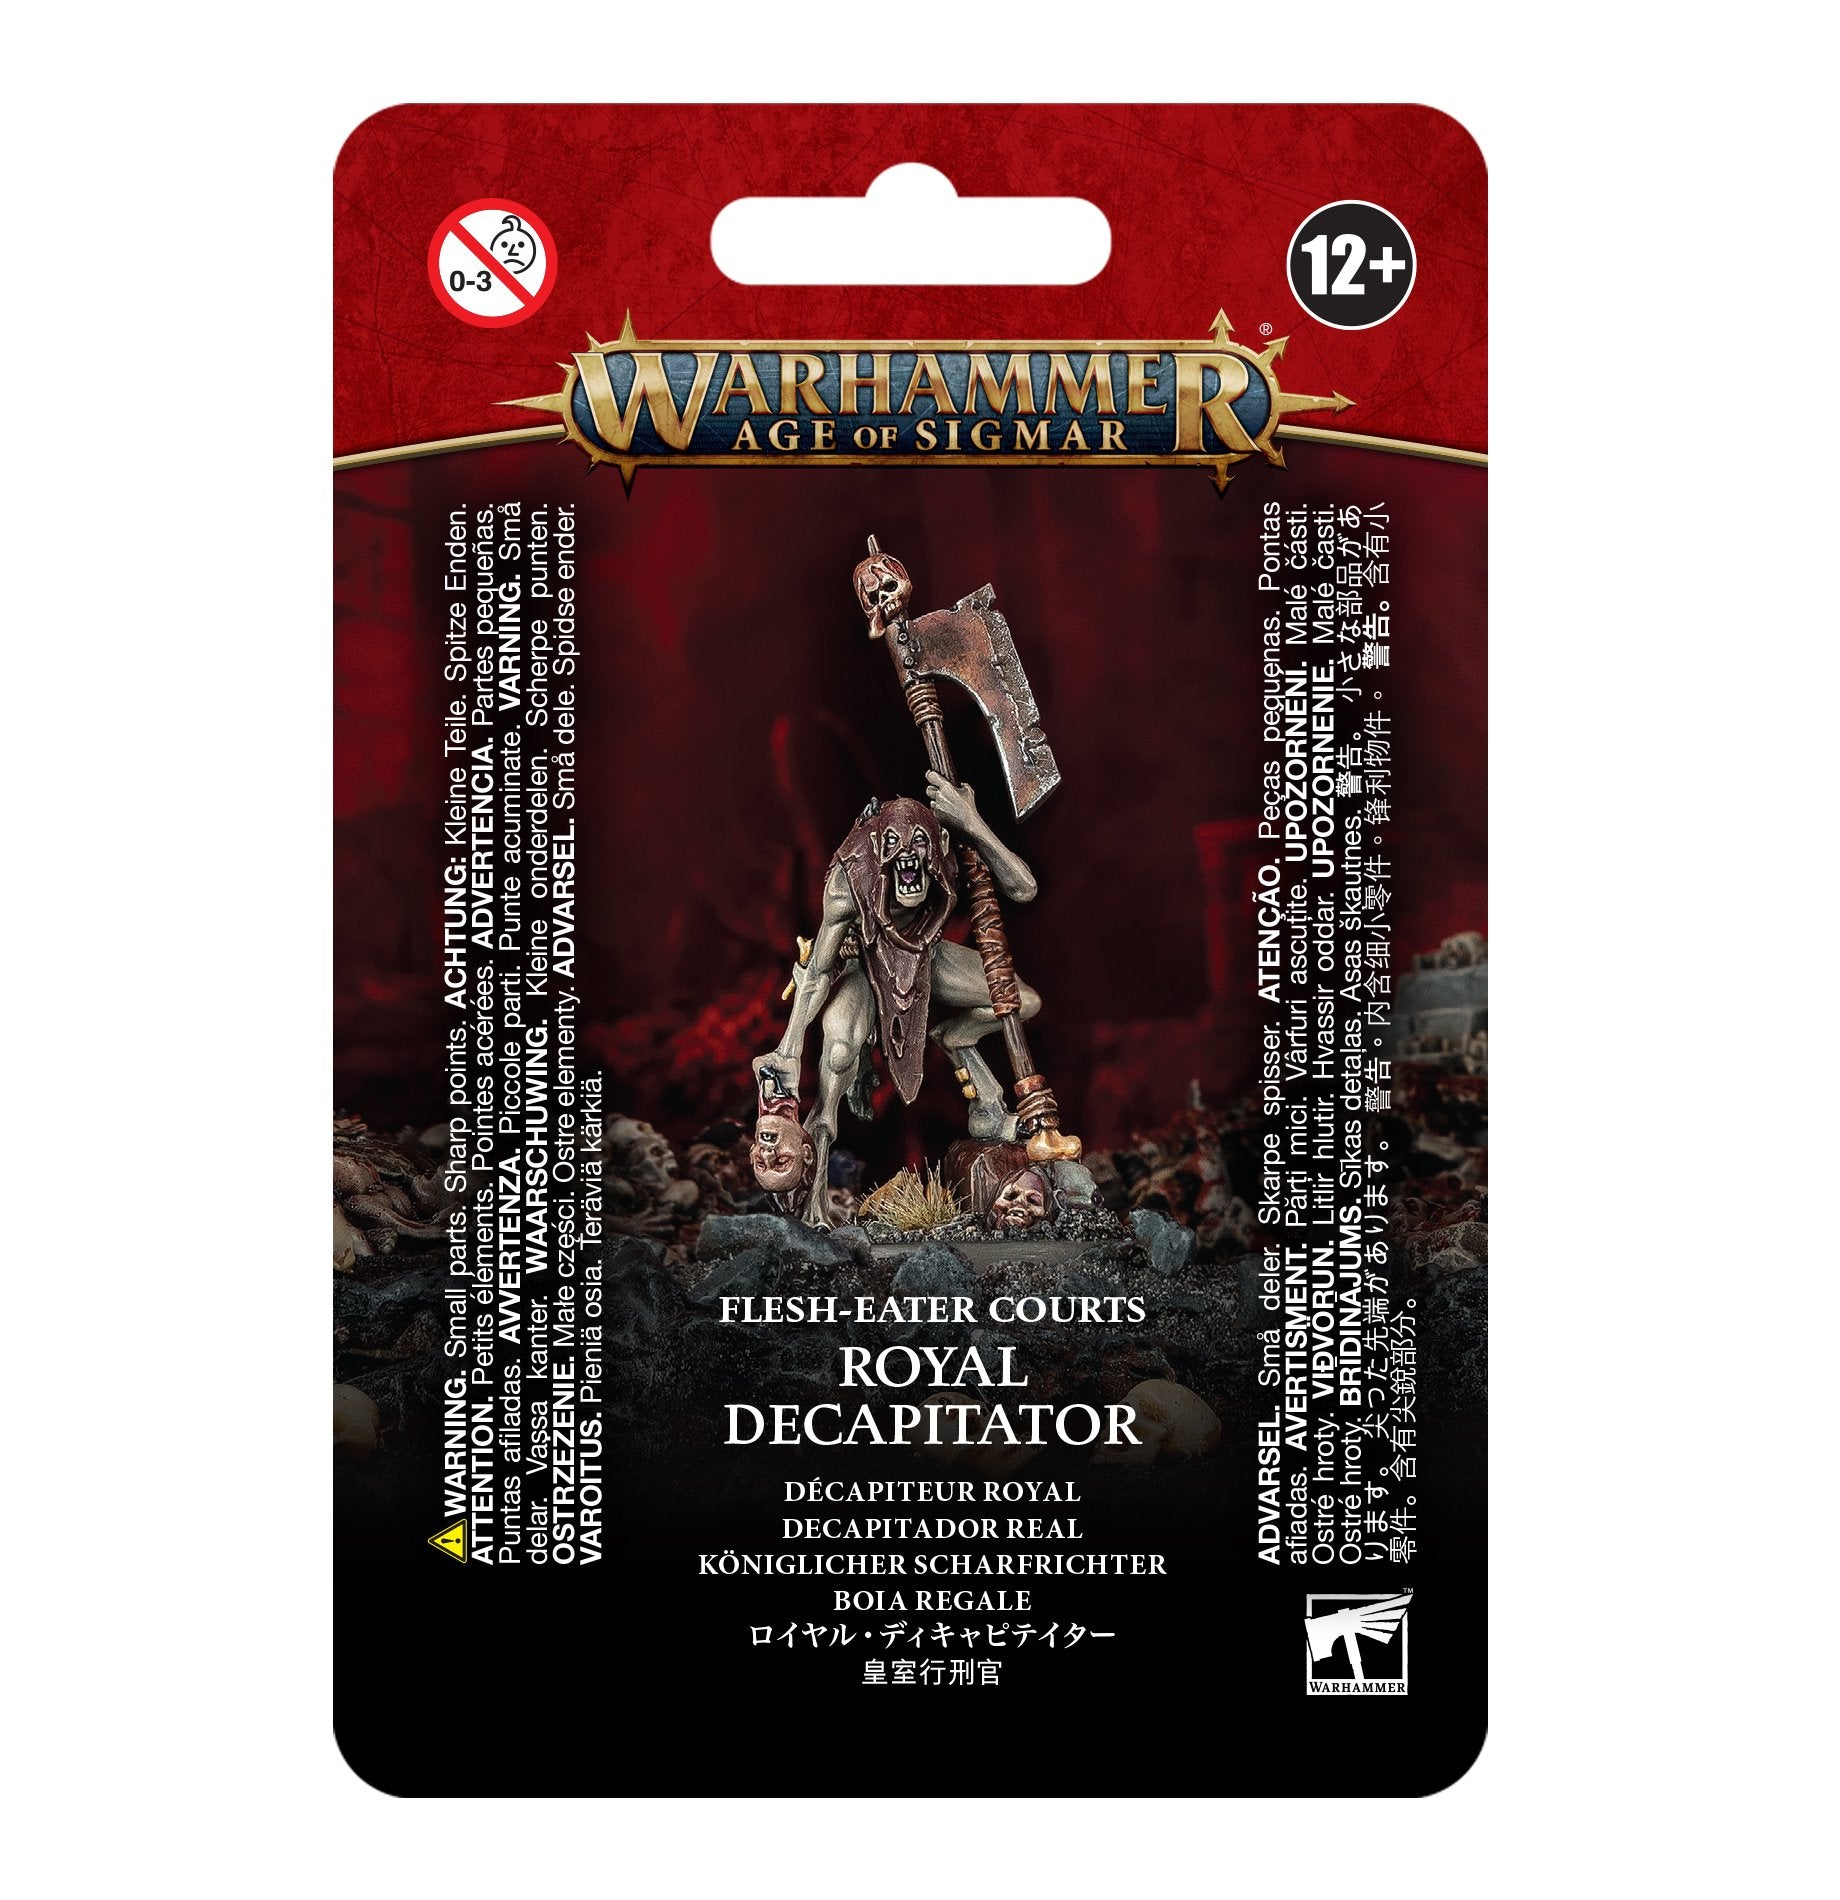 Flesh-Eater Courts: Royal Decapitator - Release Date 17/2/24 - Loaded Dice